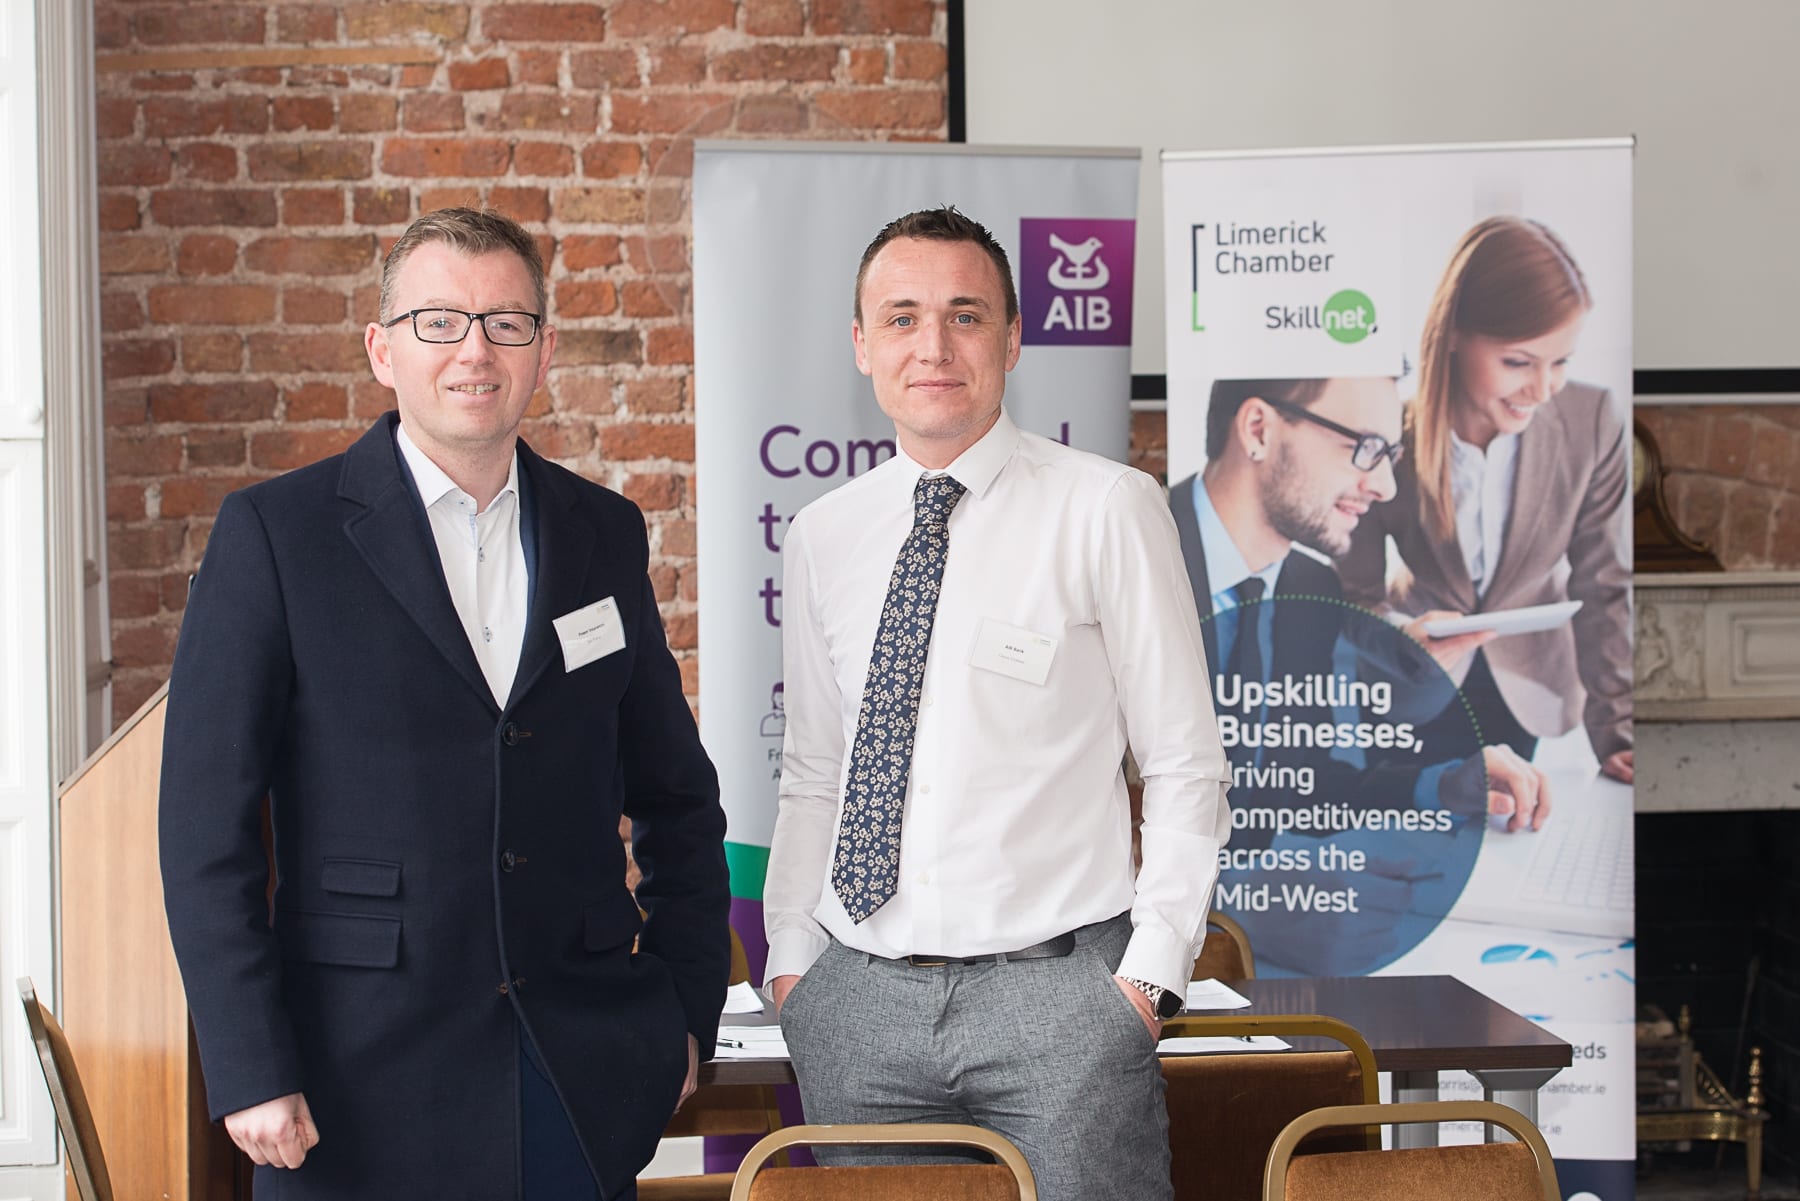 At the Limerick Chamber Skillnet Working Lunchtime Networking with Donal Fitzgibbon was From left to right: Jim Power- Power Insurance, Glenn Graham - AIB. 
Image by Morning Star Photography 